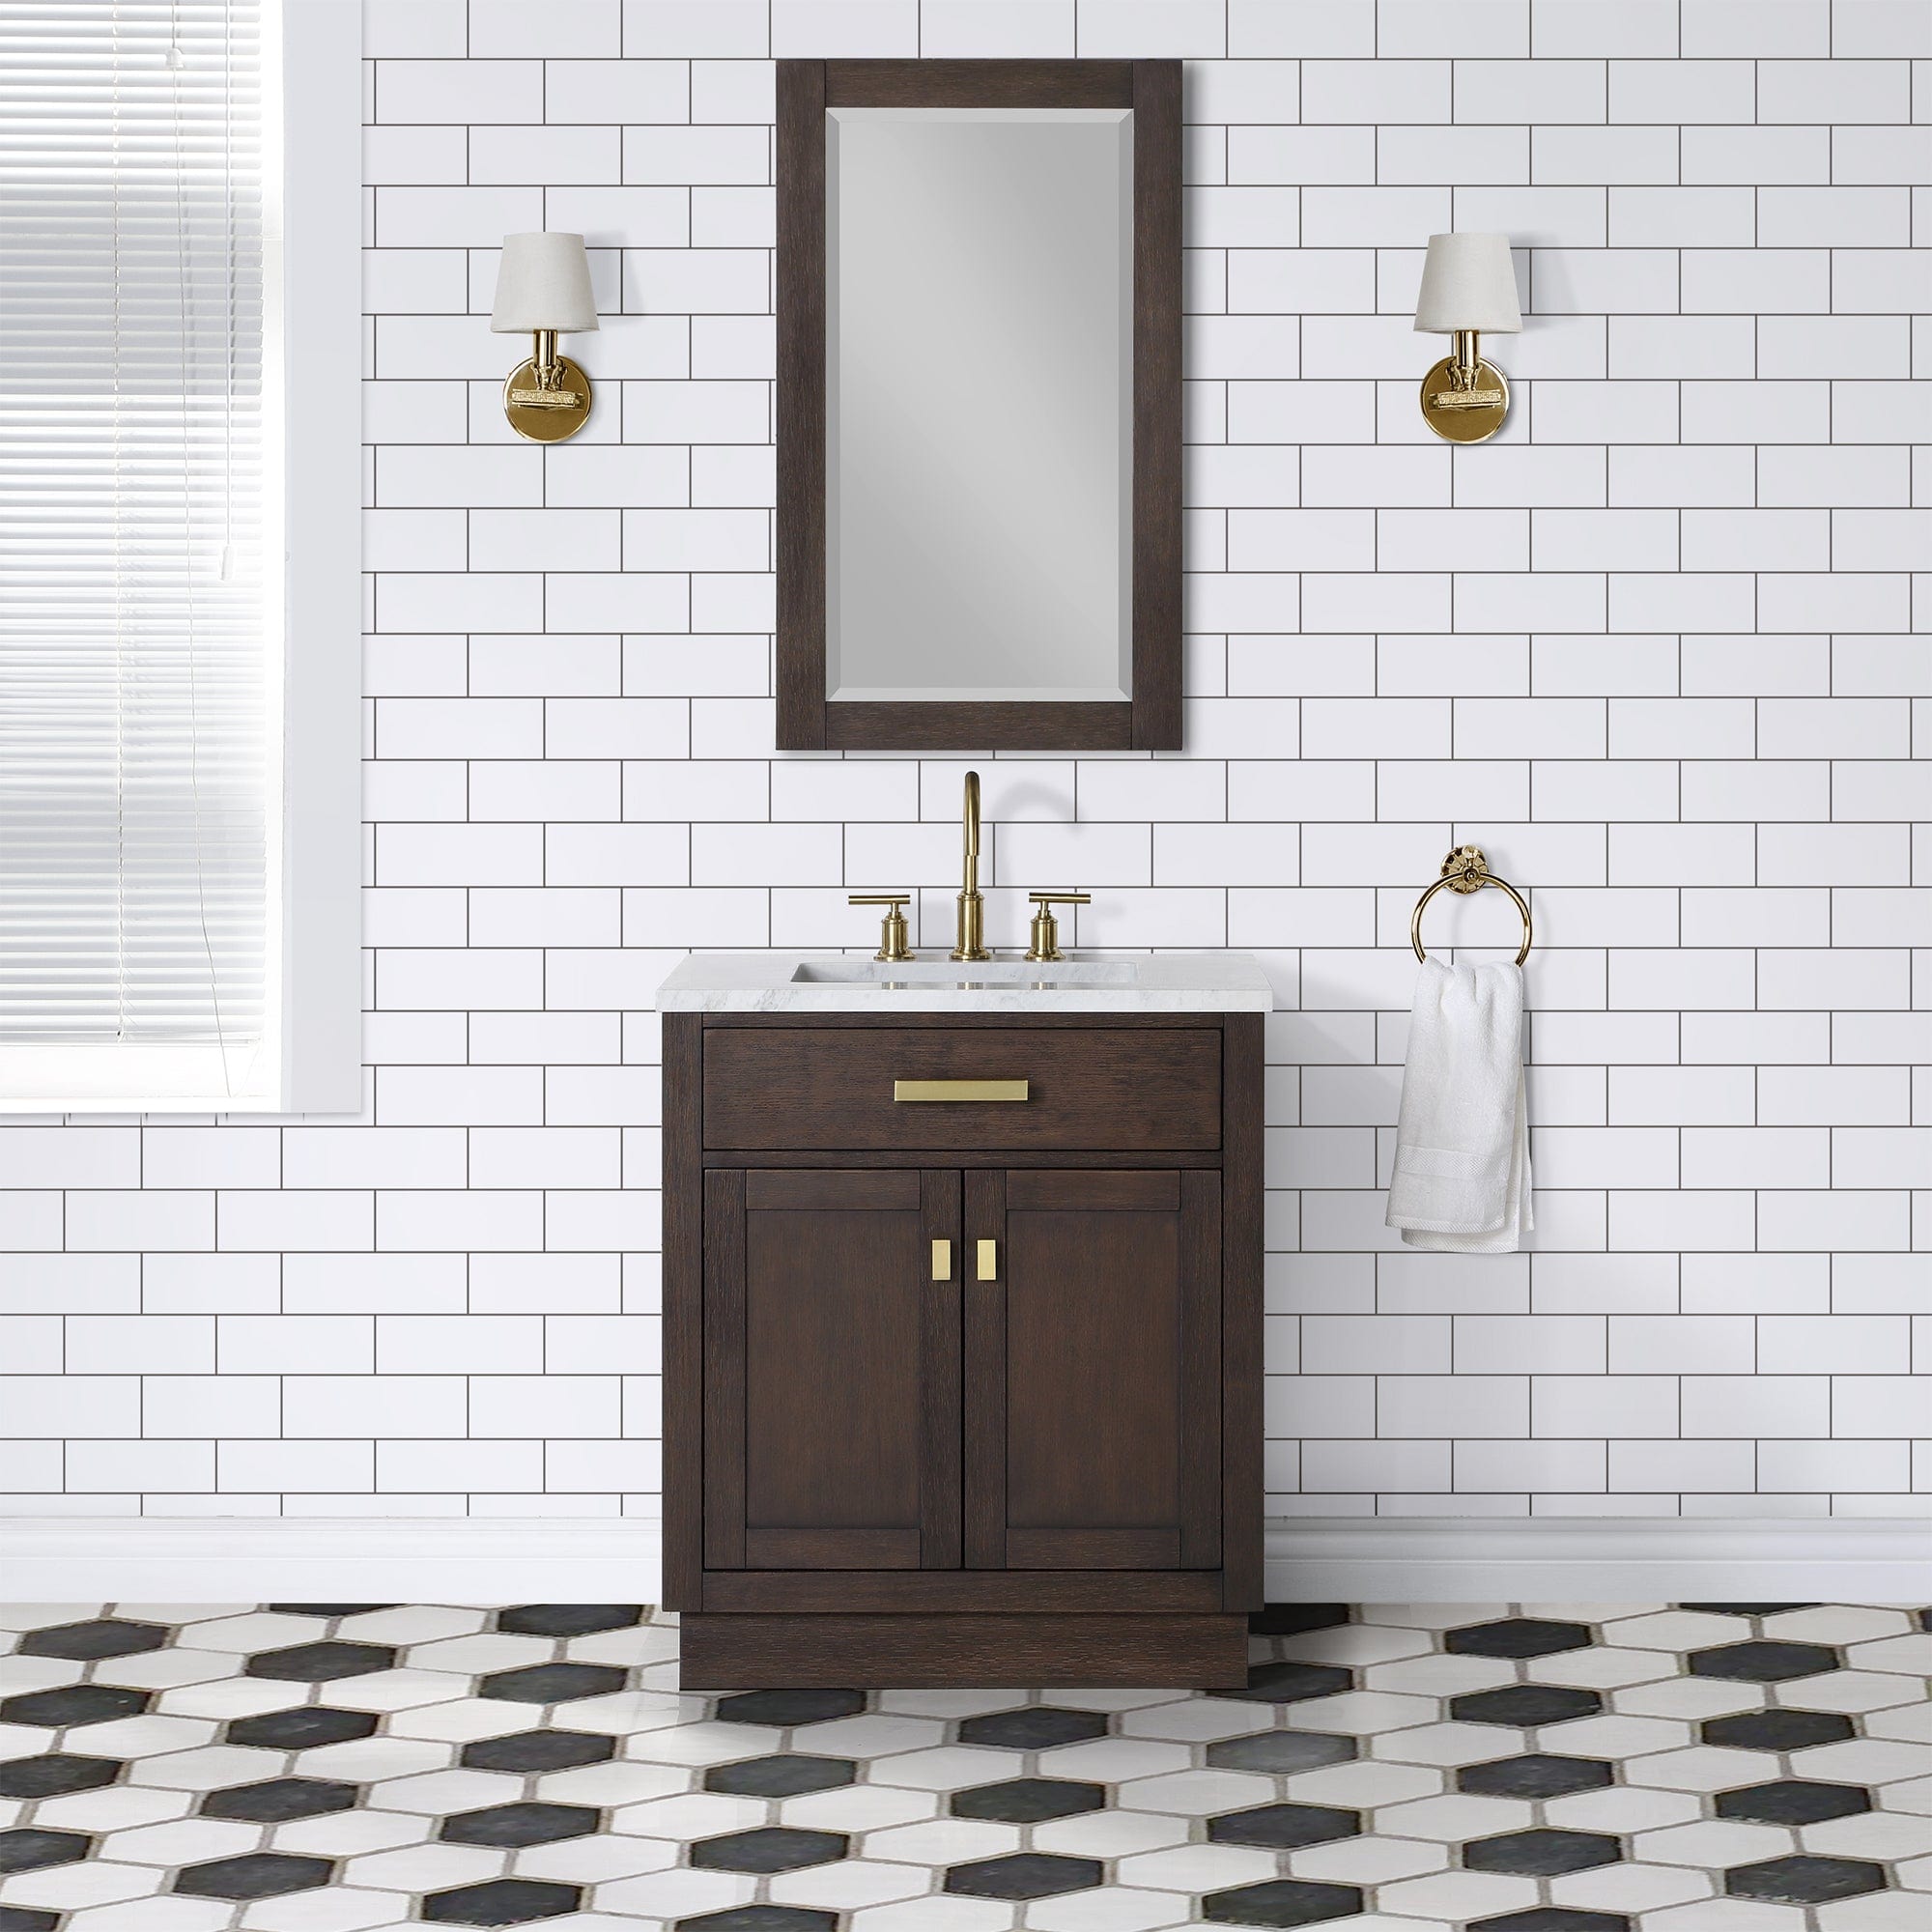 Chestnut 30 In. Single Sink Carrara White Marble Countertop Vanity In Brown Oak with Grooseneck Faucet and Mirror - Molaix732030764682CH30CW06BK-R21BL1406